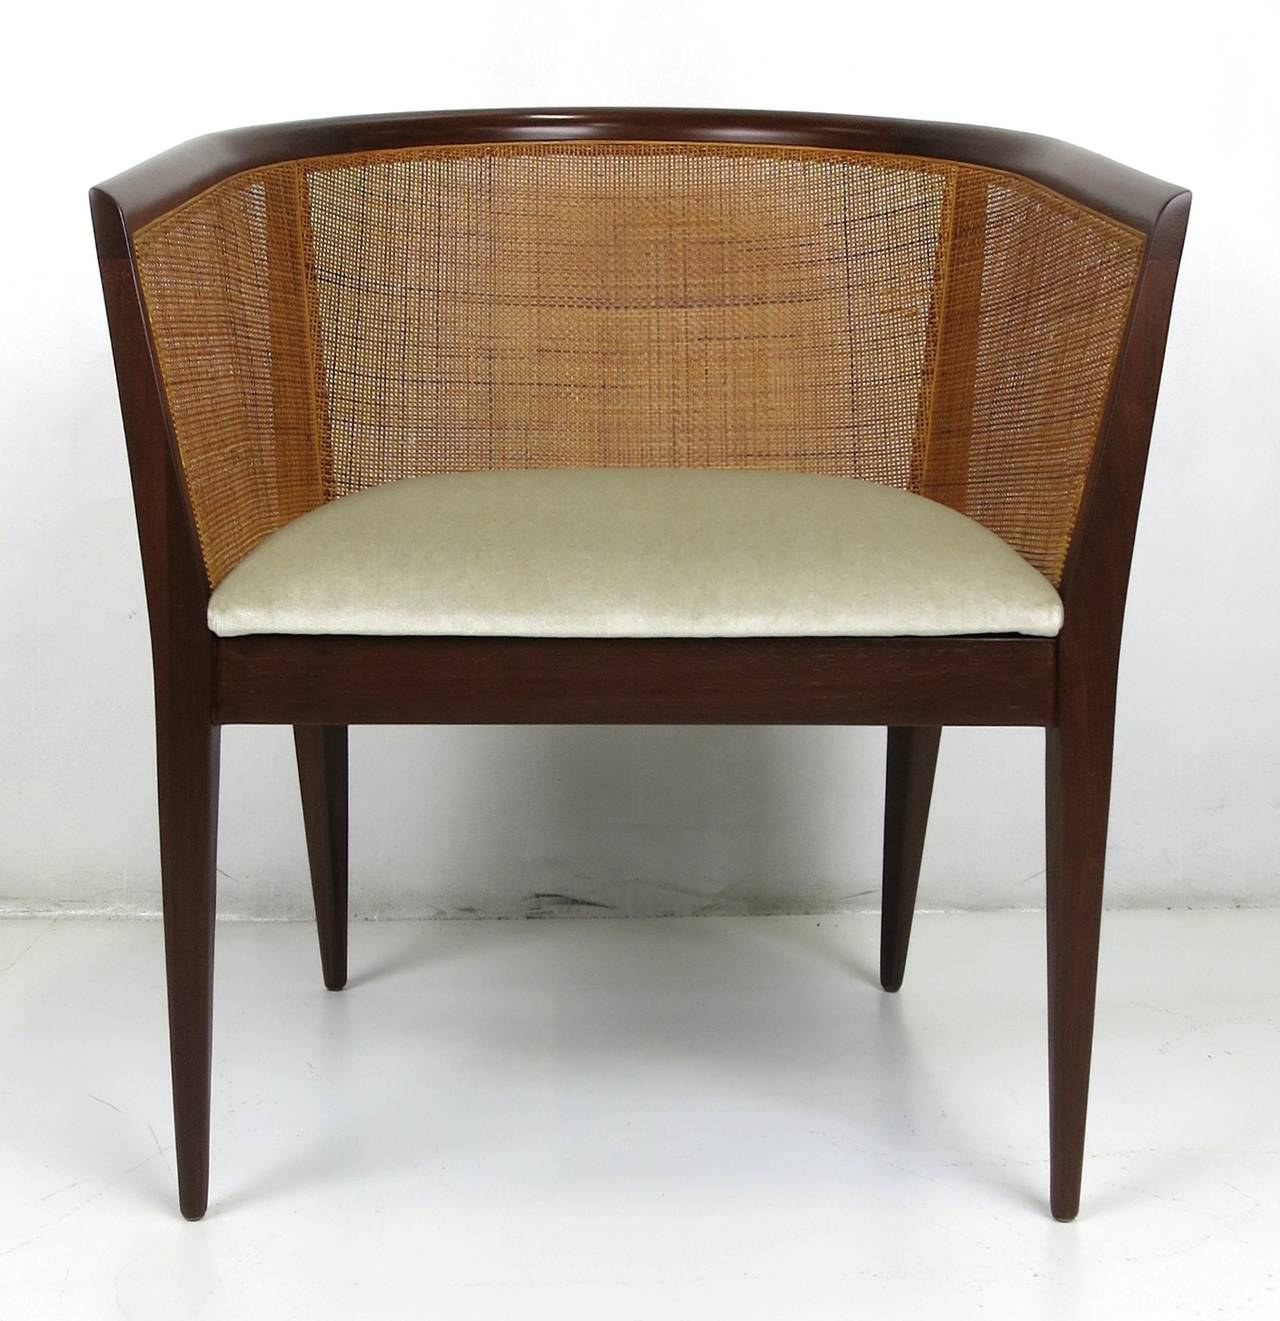 Modern Caned Back Lounge Chair by Kipp Stewart for Directional